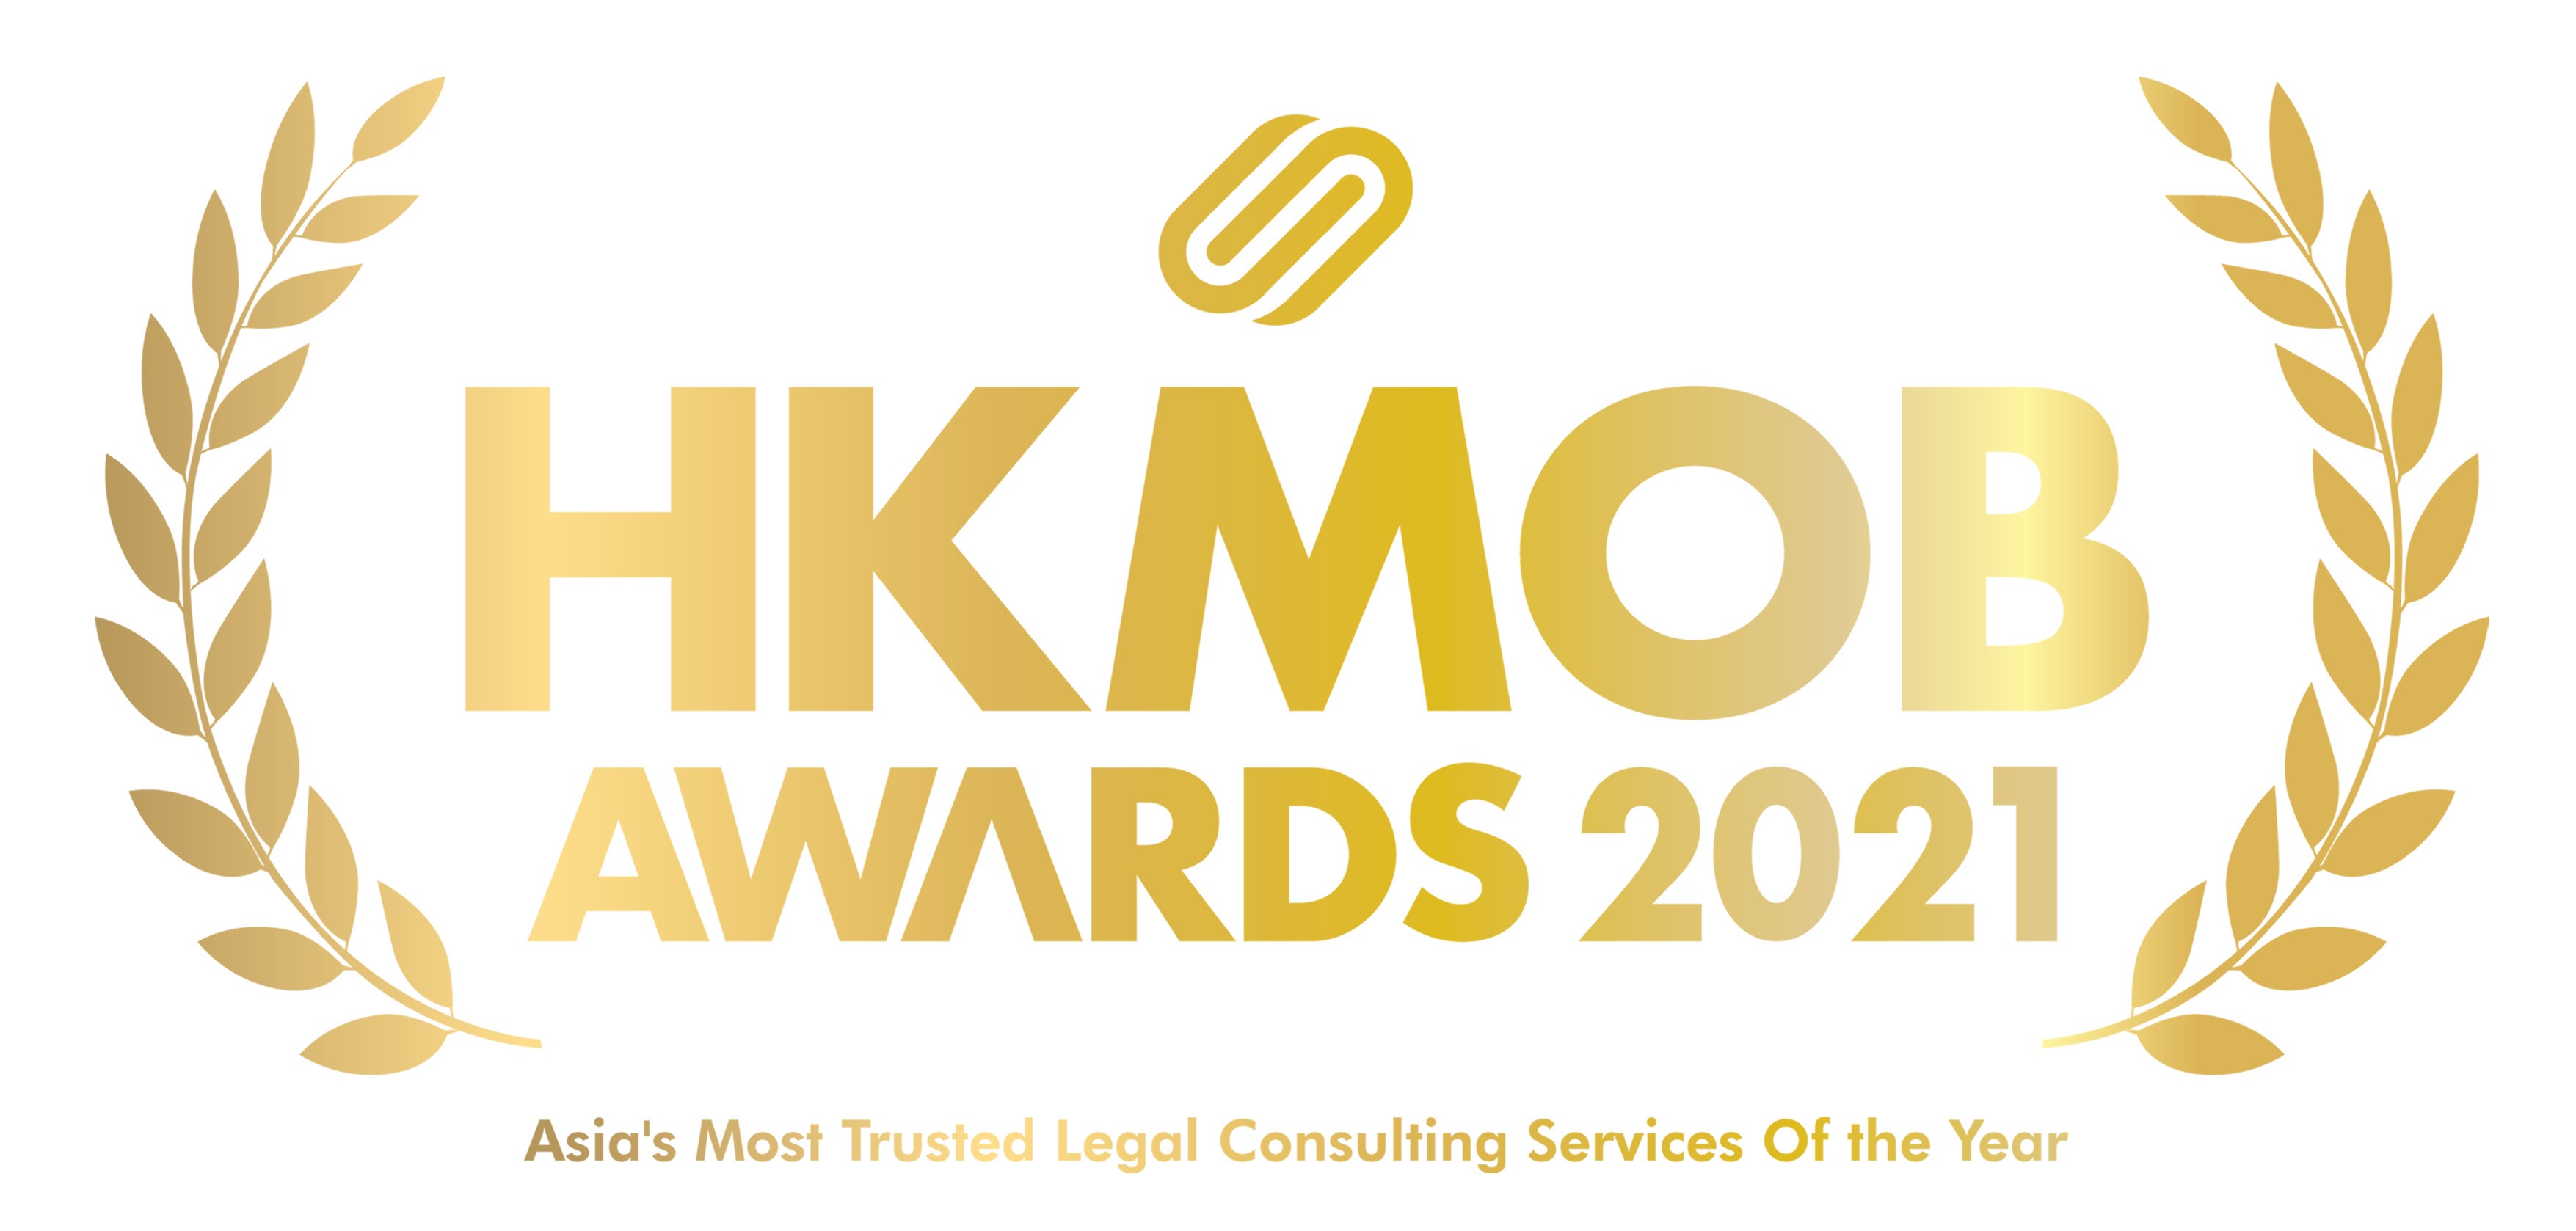 CORPHUB HKMOB Awards 2021 – Asia's Most Trusted Legal Consulting Services of the Year, LC Lawyers LLP, 2021